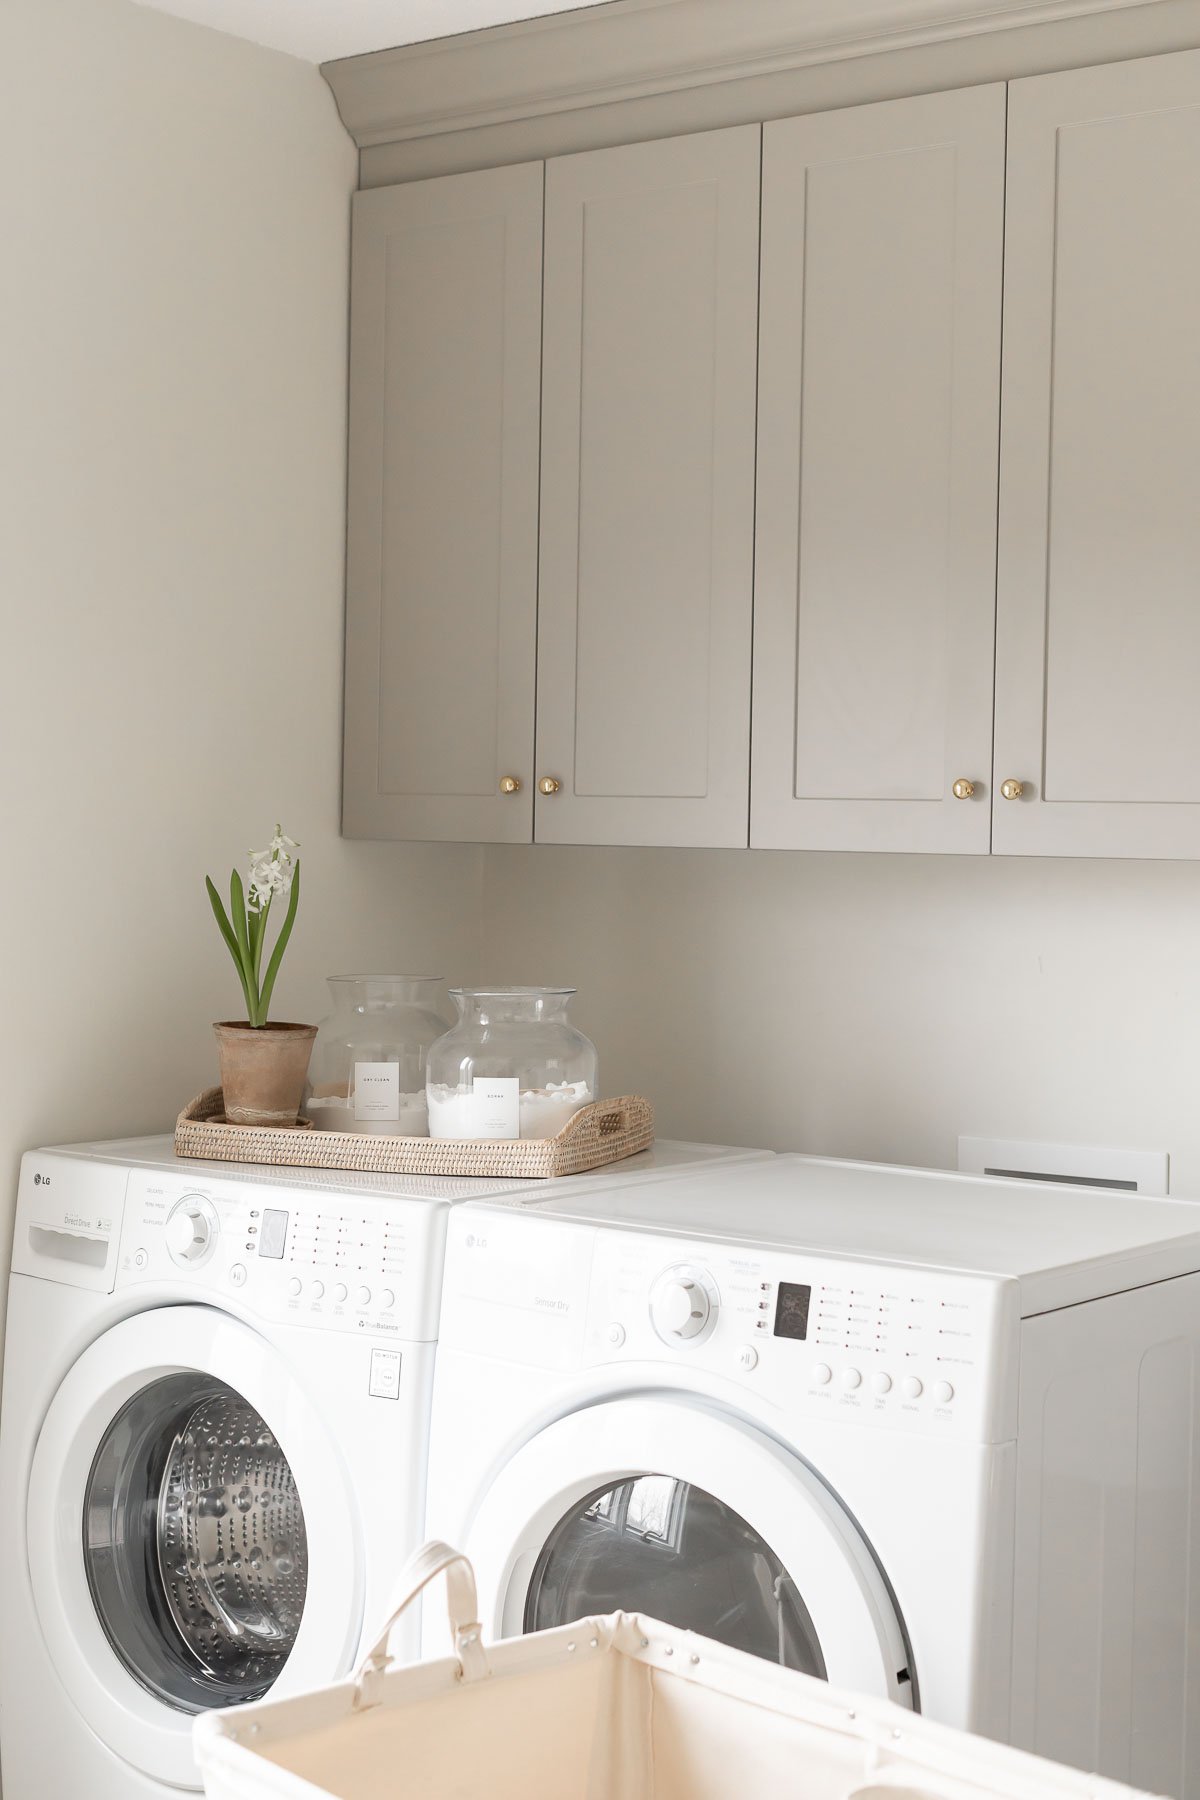 An organized laundry room equipped with a washer and dryer.